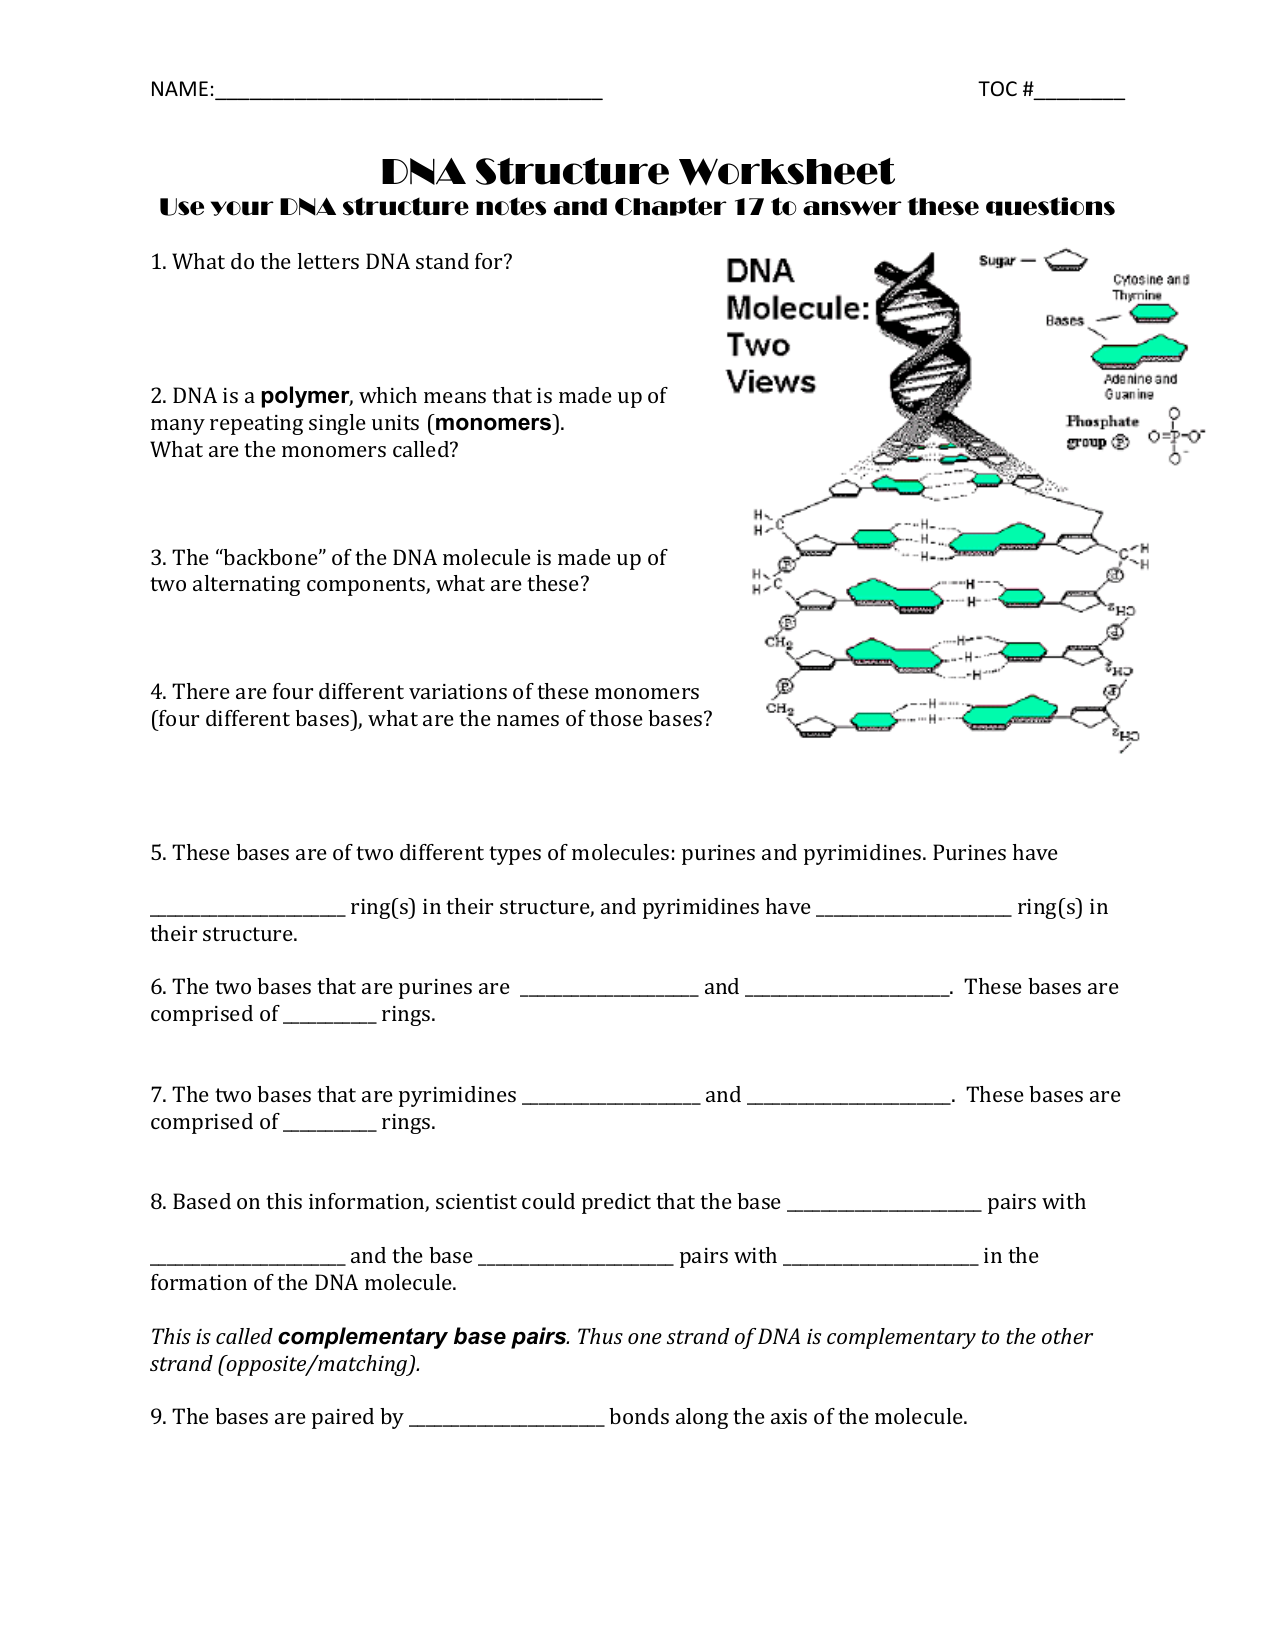 dna structure worksheet Pertaining To Dna Structure Worksheet Answer